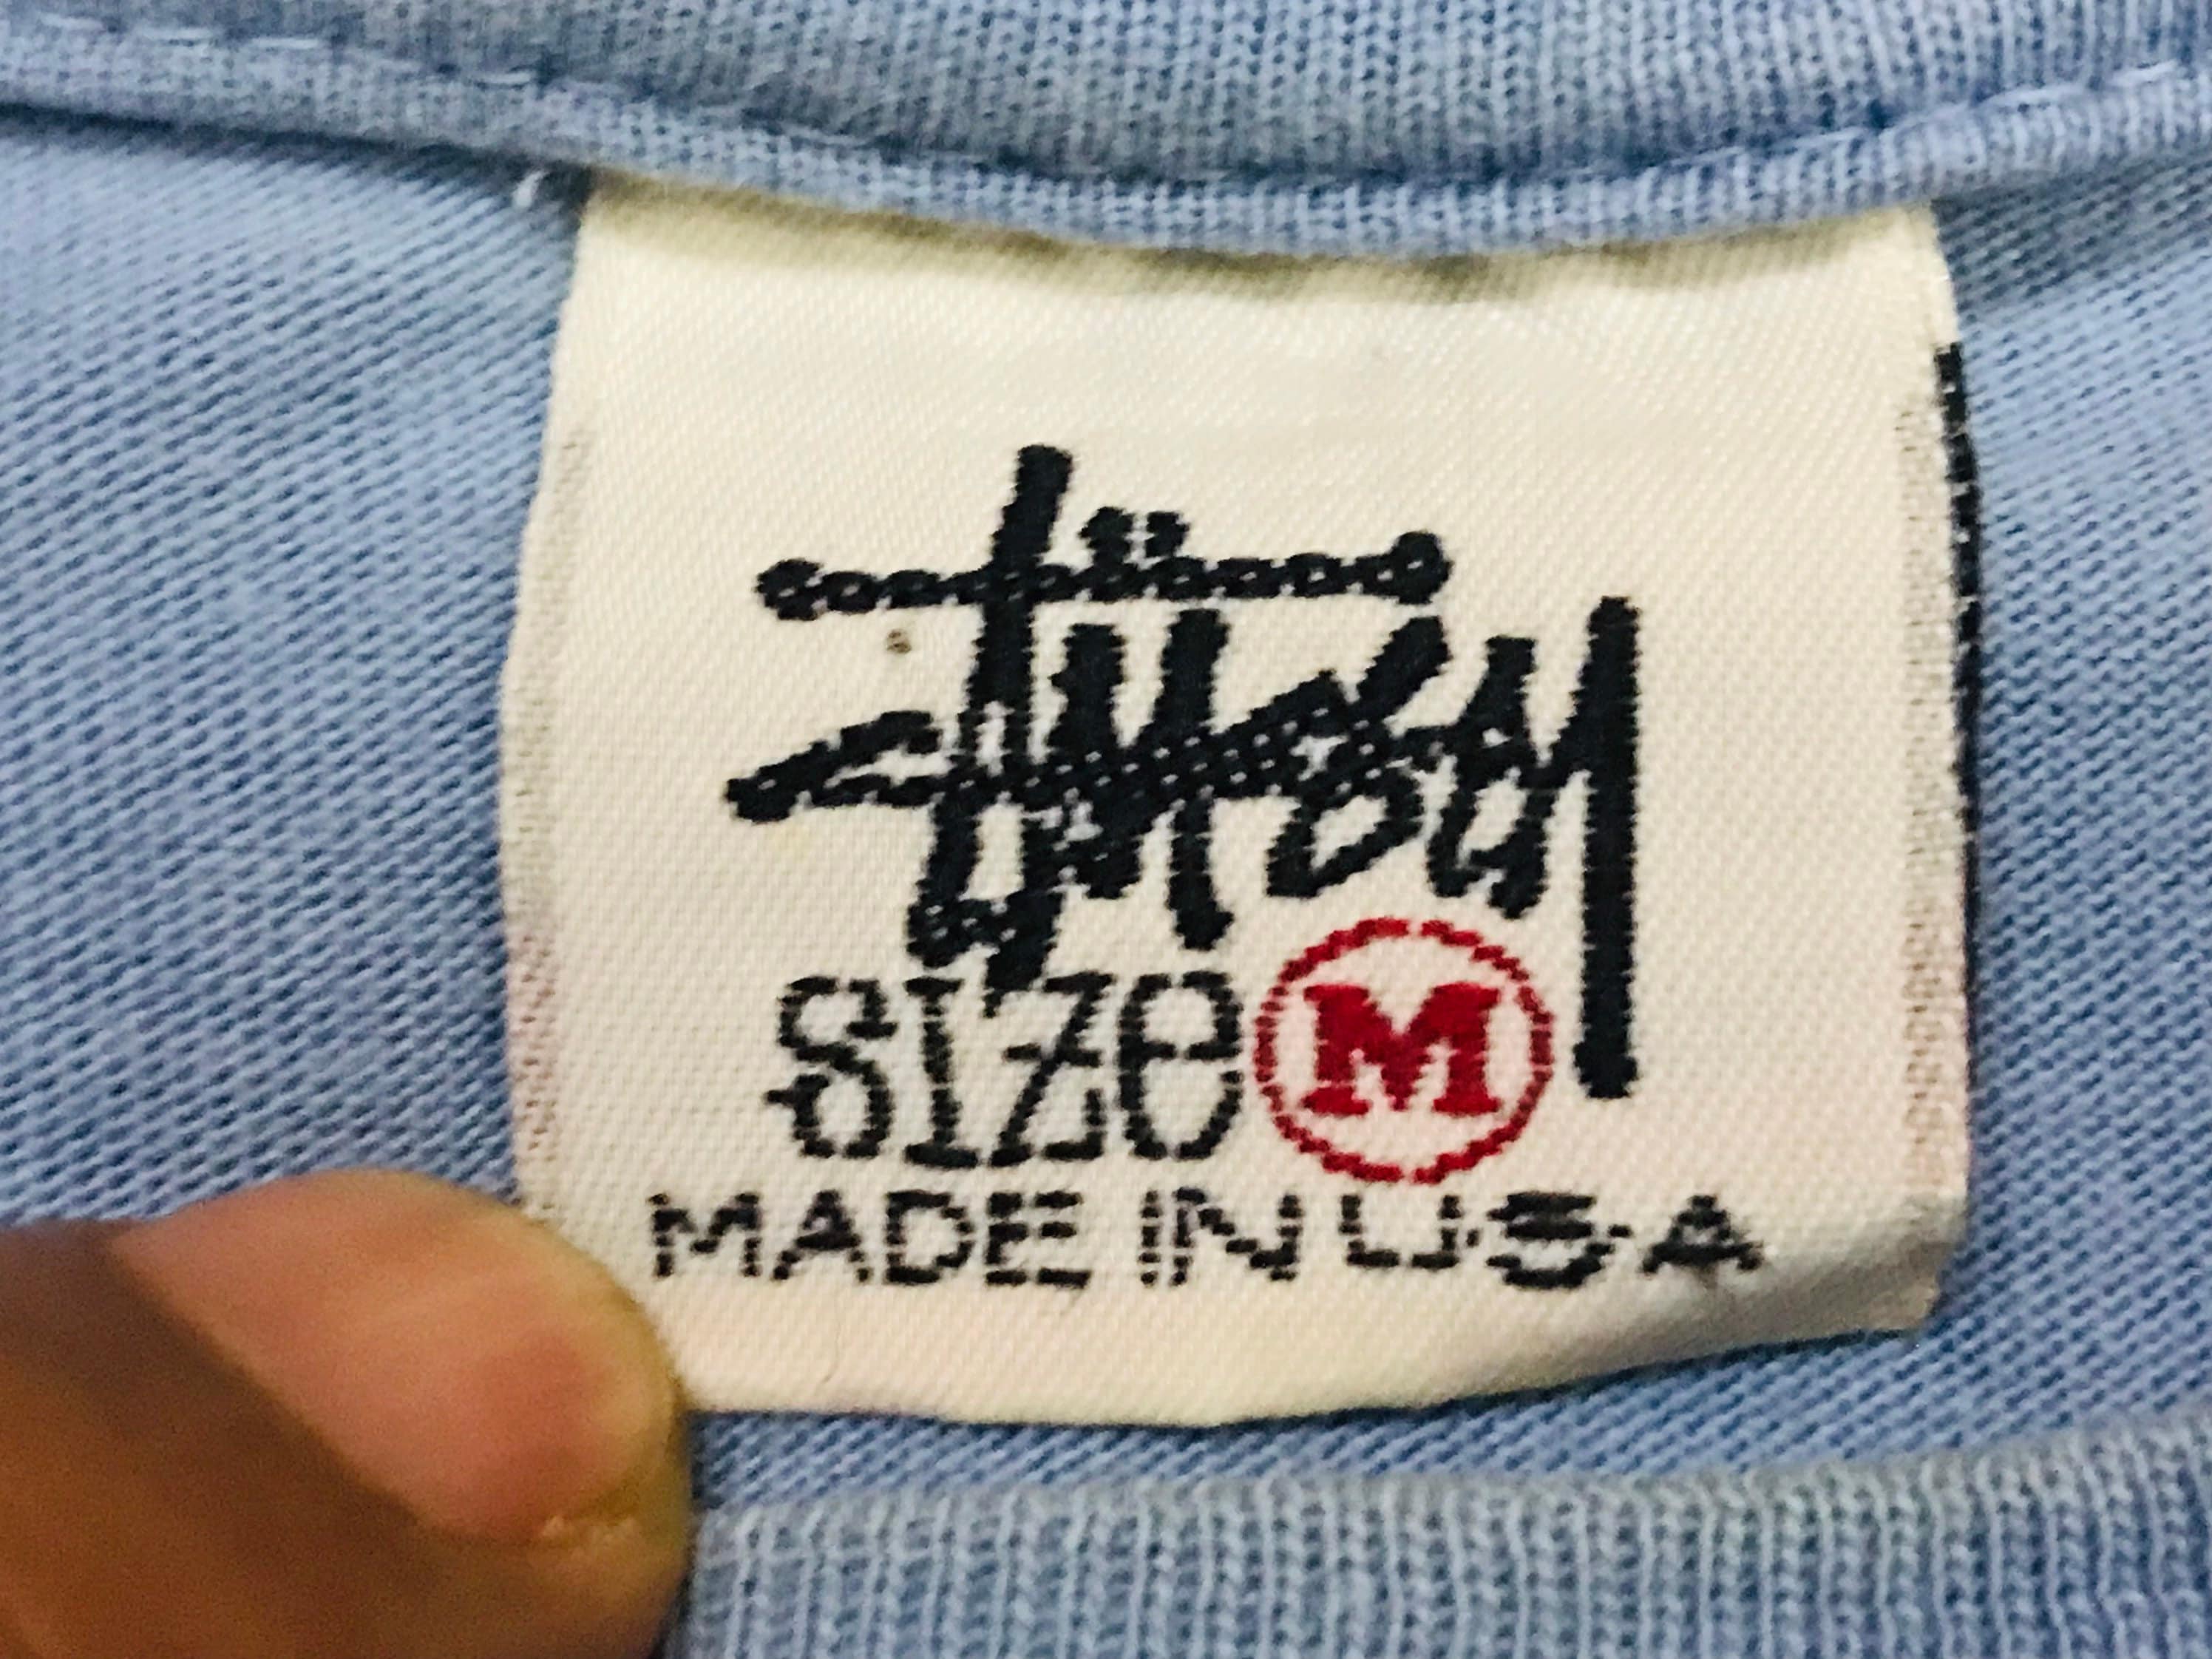 Vintage Early 00s Stussy Monogram T Shirt Single Stitch Size L 20”x27”  (SOLD) Available tmrw instore at 12pm. Taking online/phone orders…